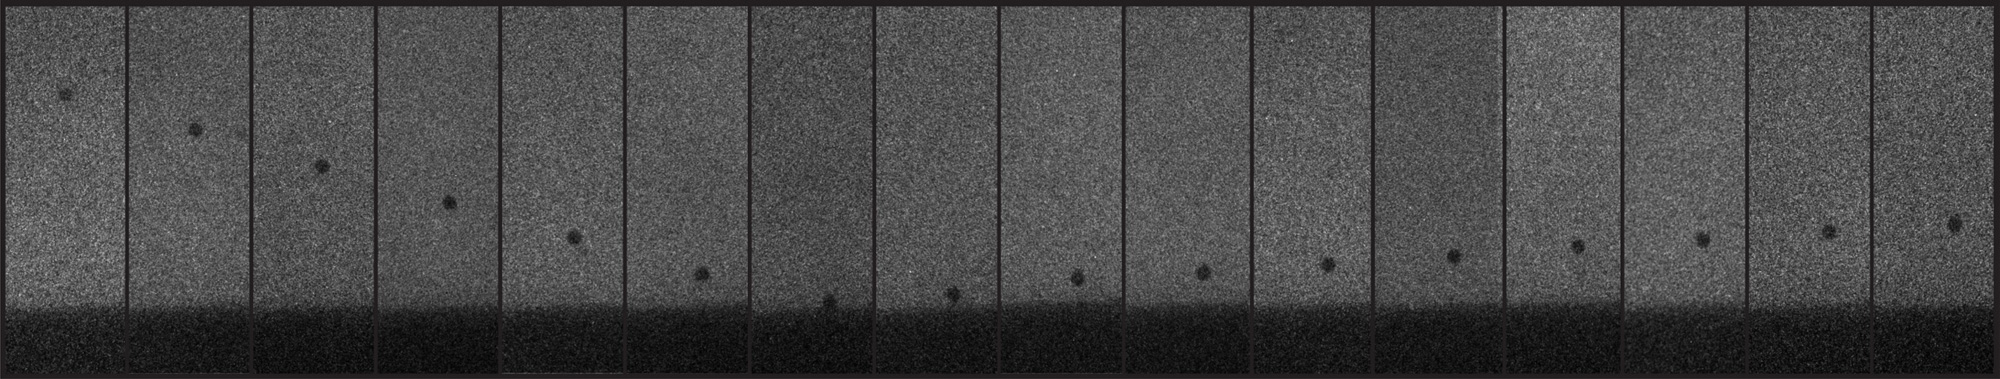  A series of 16 monochrome photos show a tiny particle bouncing on a surface.